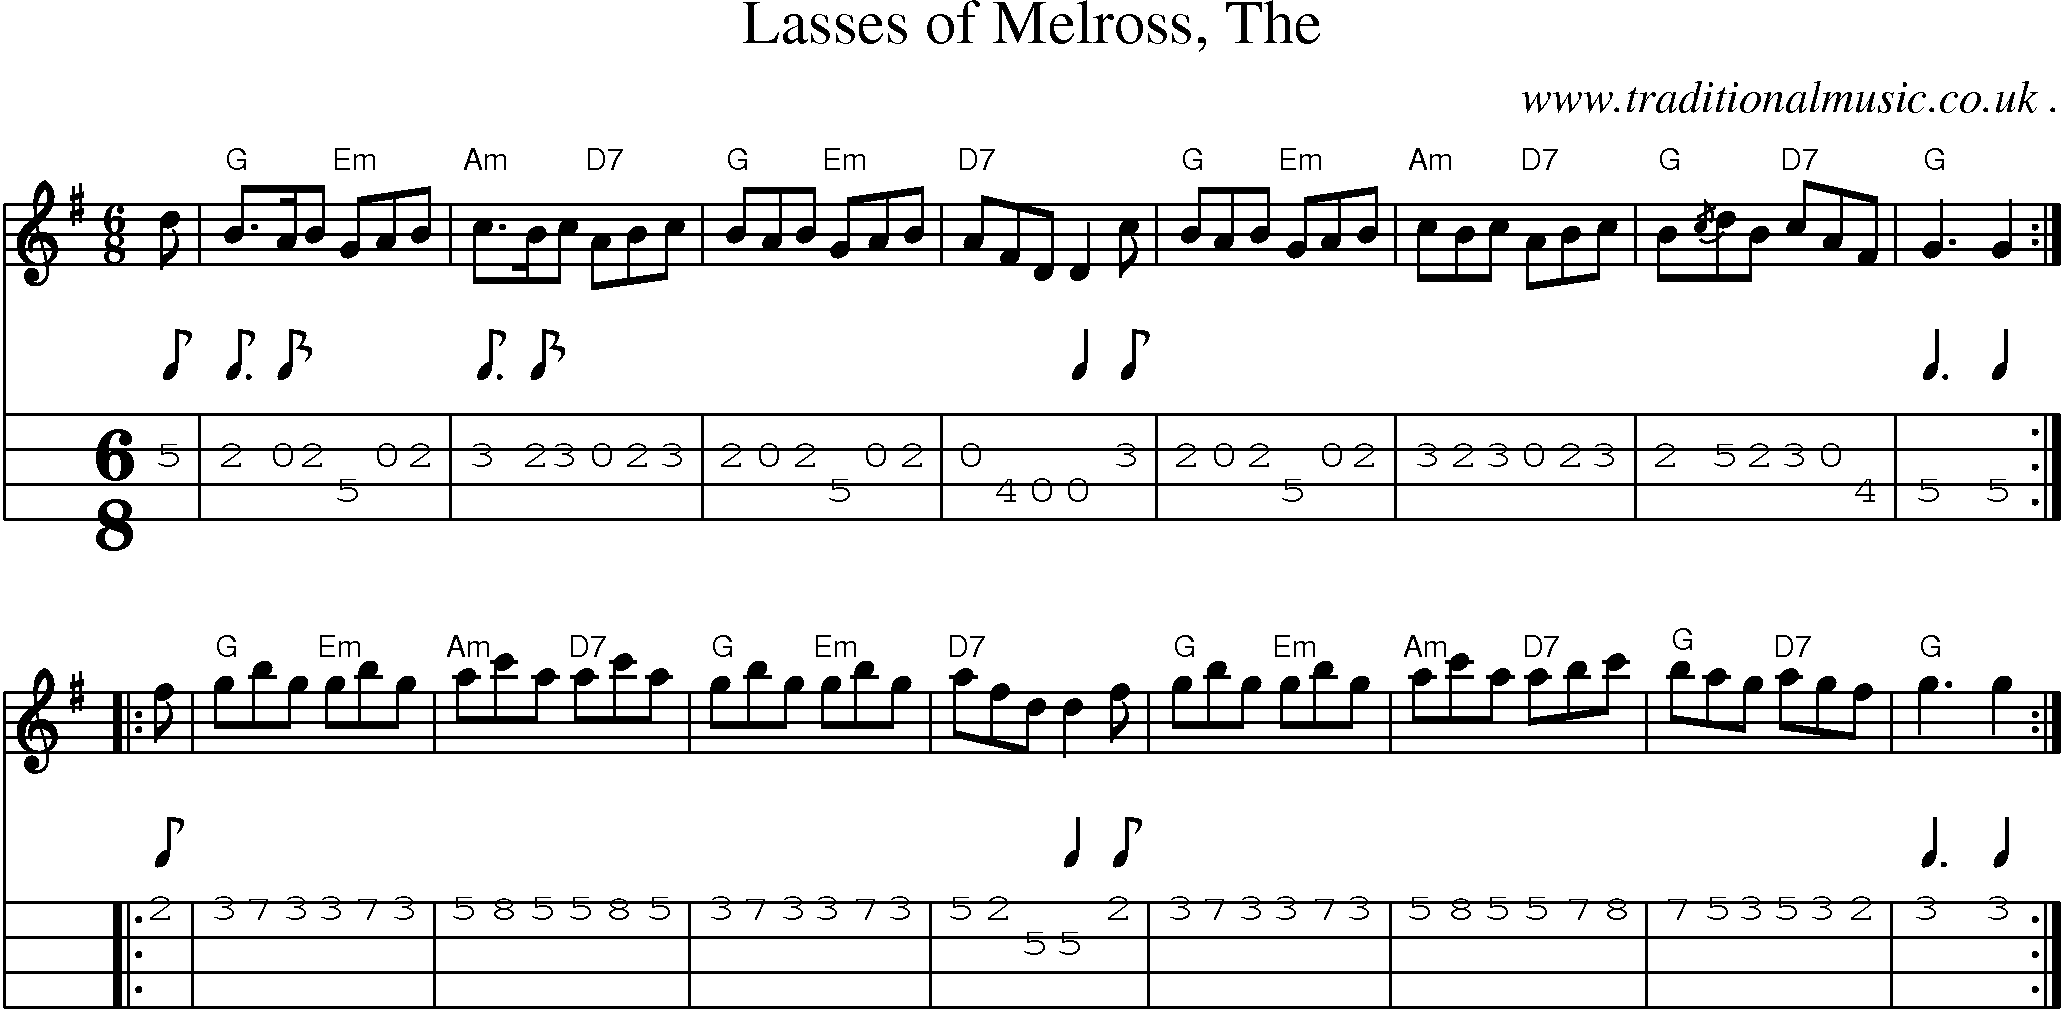 Sheet-music  score, Chords and Mandolin Tabs for Lasses Of Melross The